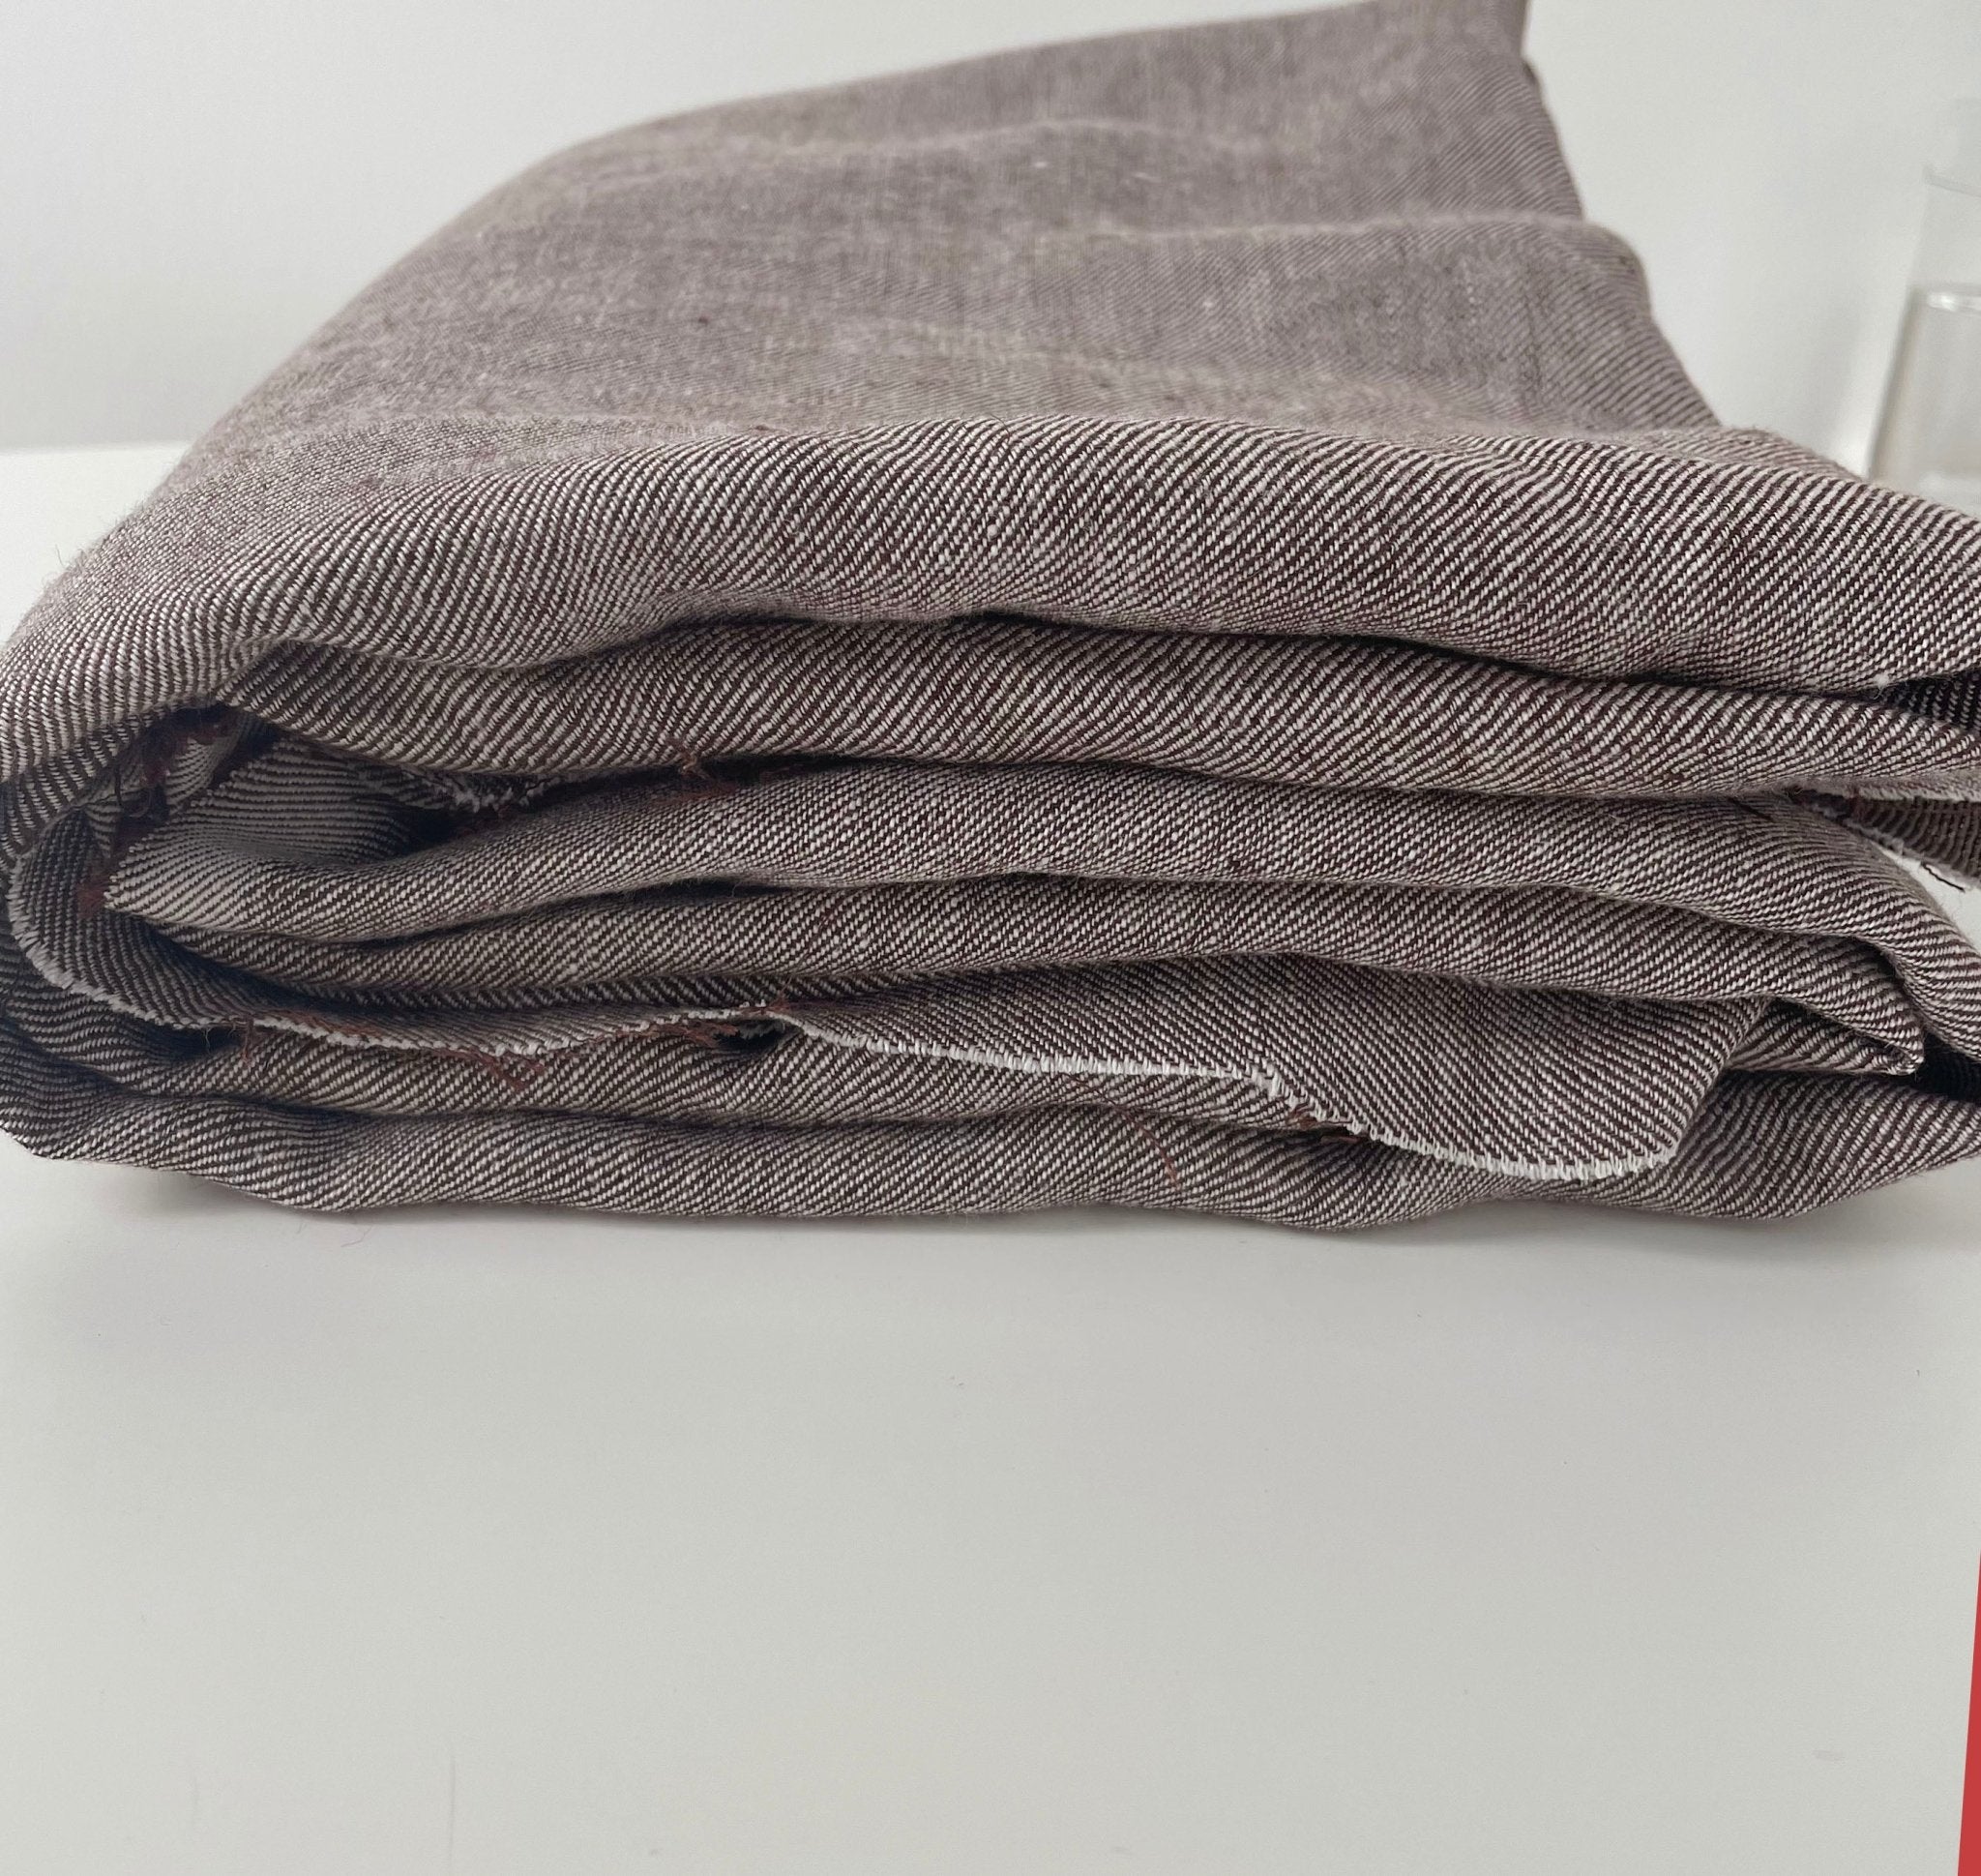 Linen Brown Twill Fabric 4796 - The Linen Lab - Brown